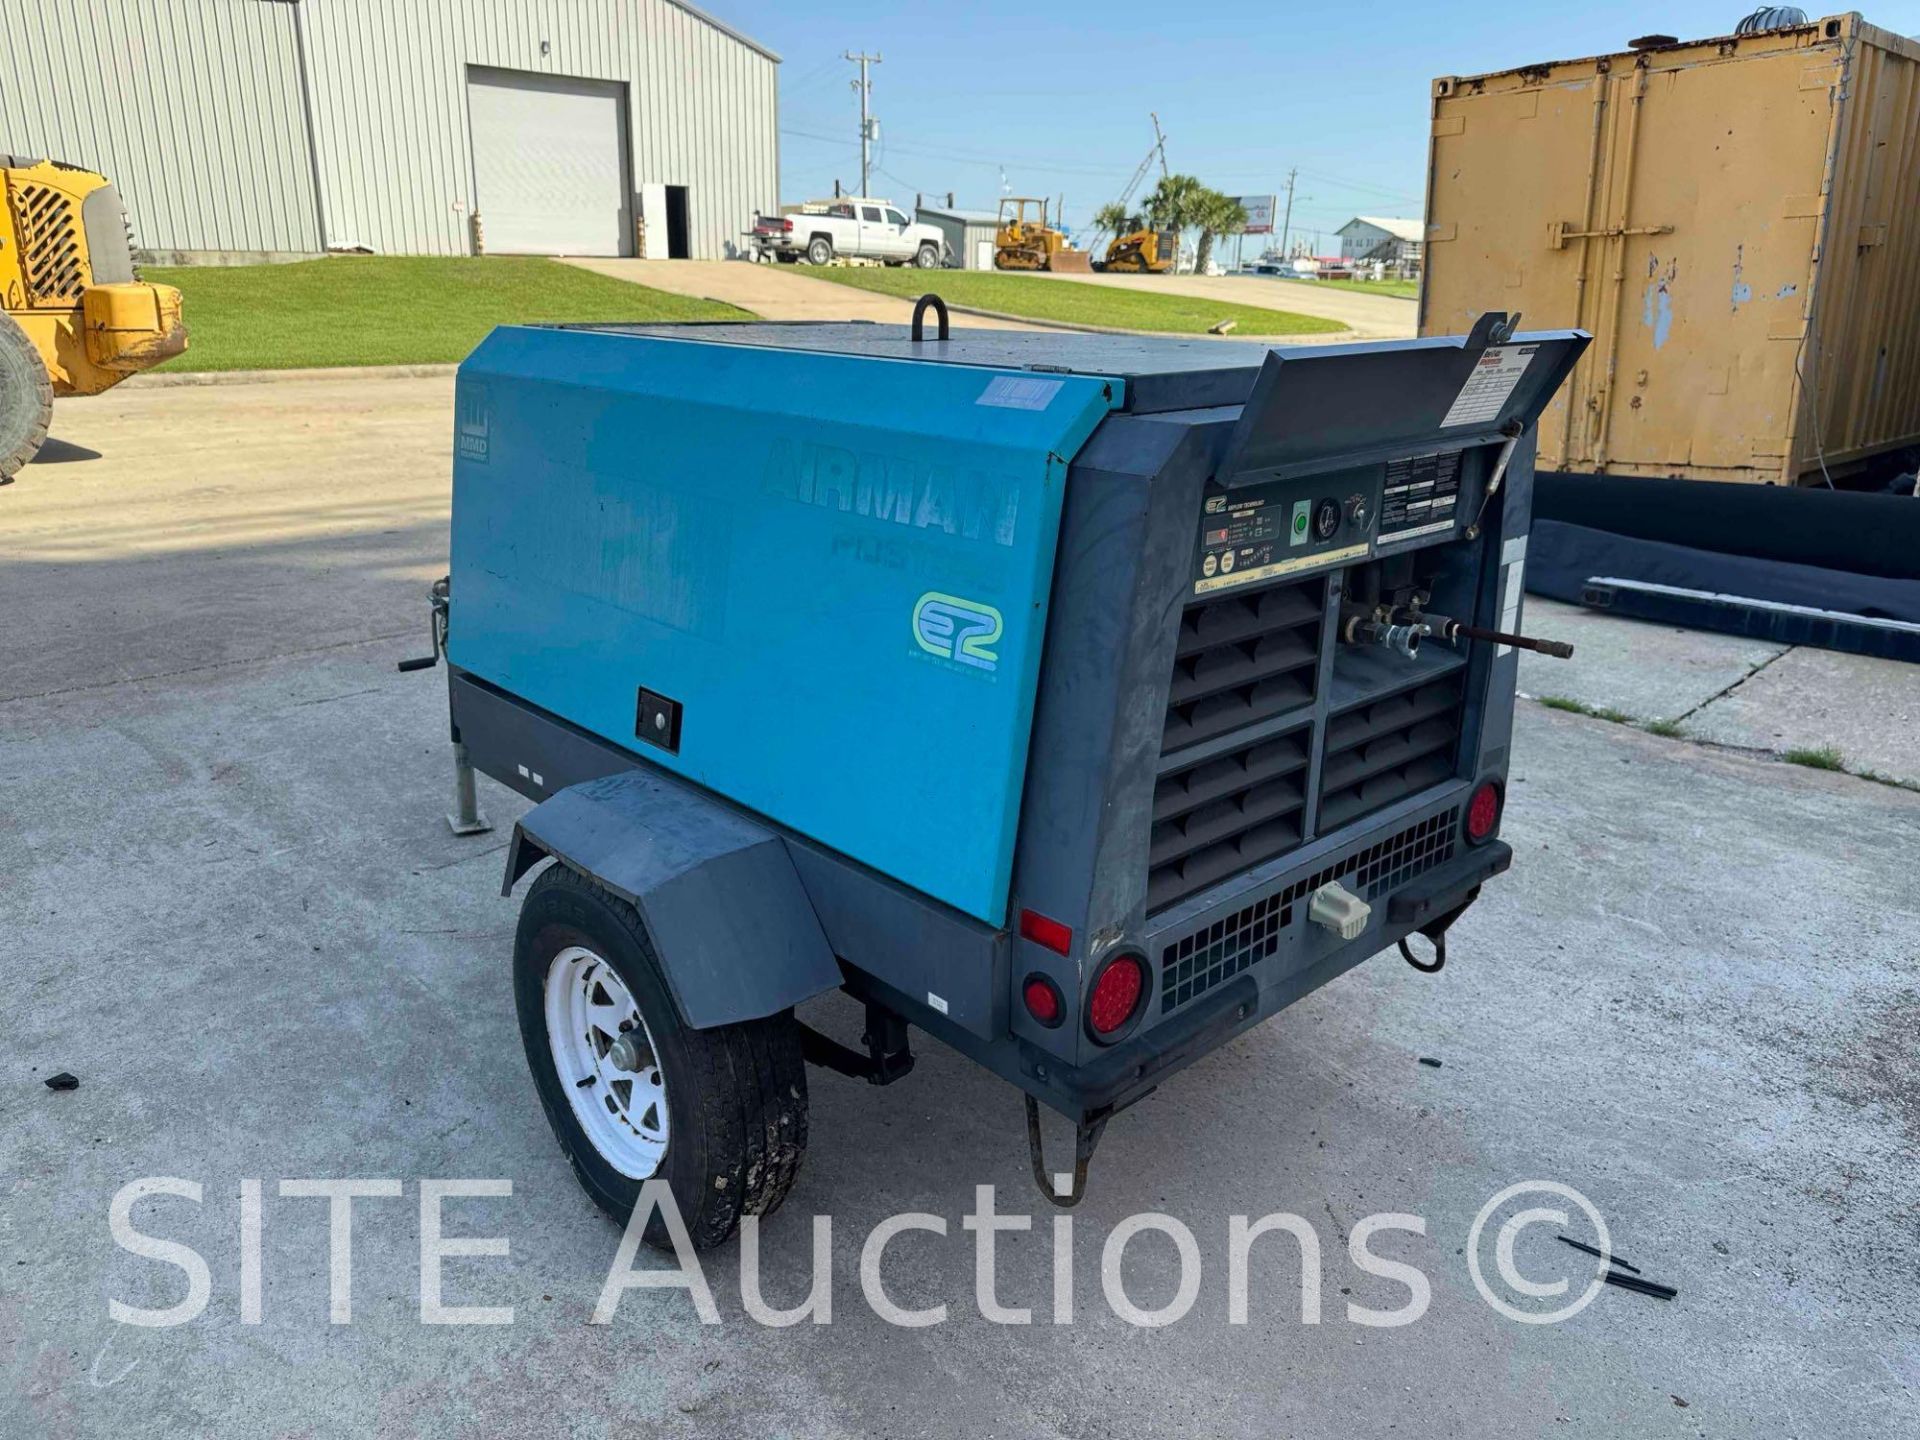 2012 Airman PDS185S Portable Air Compressor - Image 18 of 19